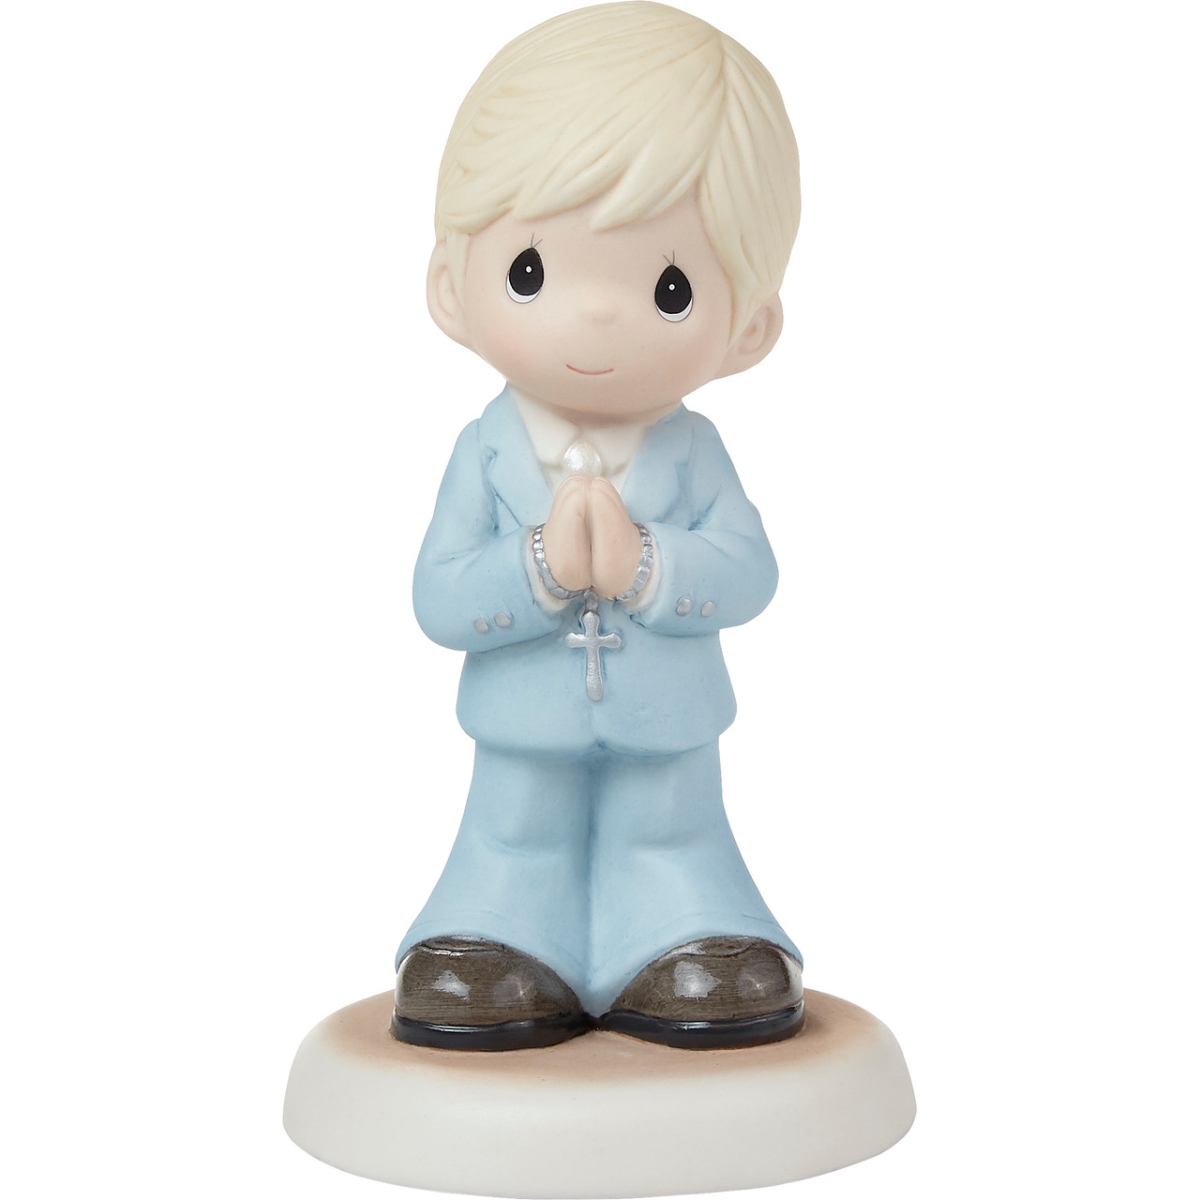 Picture of Be the Light Christian Bookstore 222022 5.25 in. Porcelain Standing Communion Boy Light Skin Blonde Hair Figurine, Multi Color